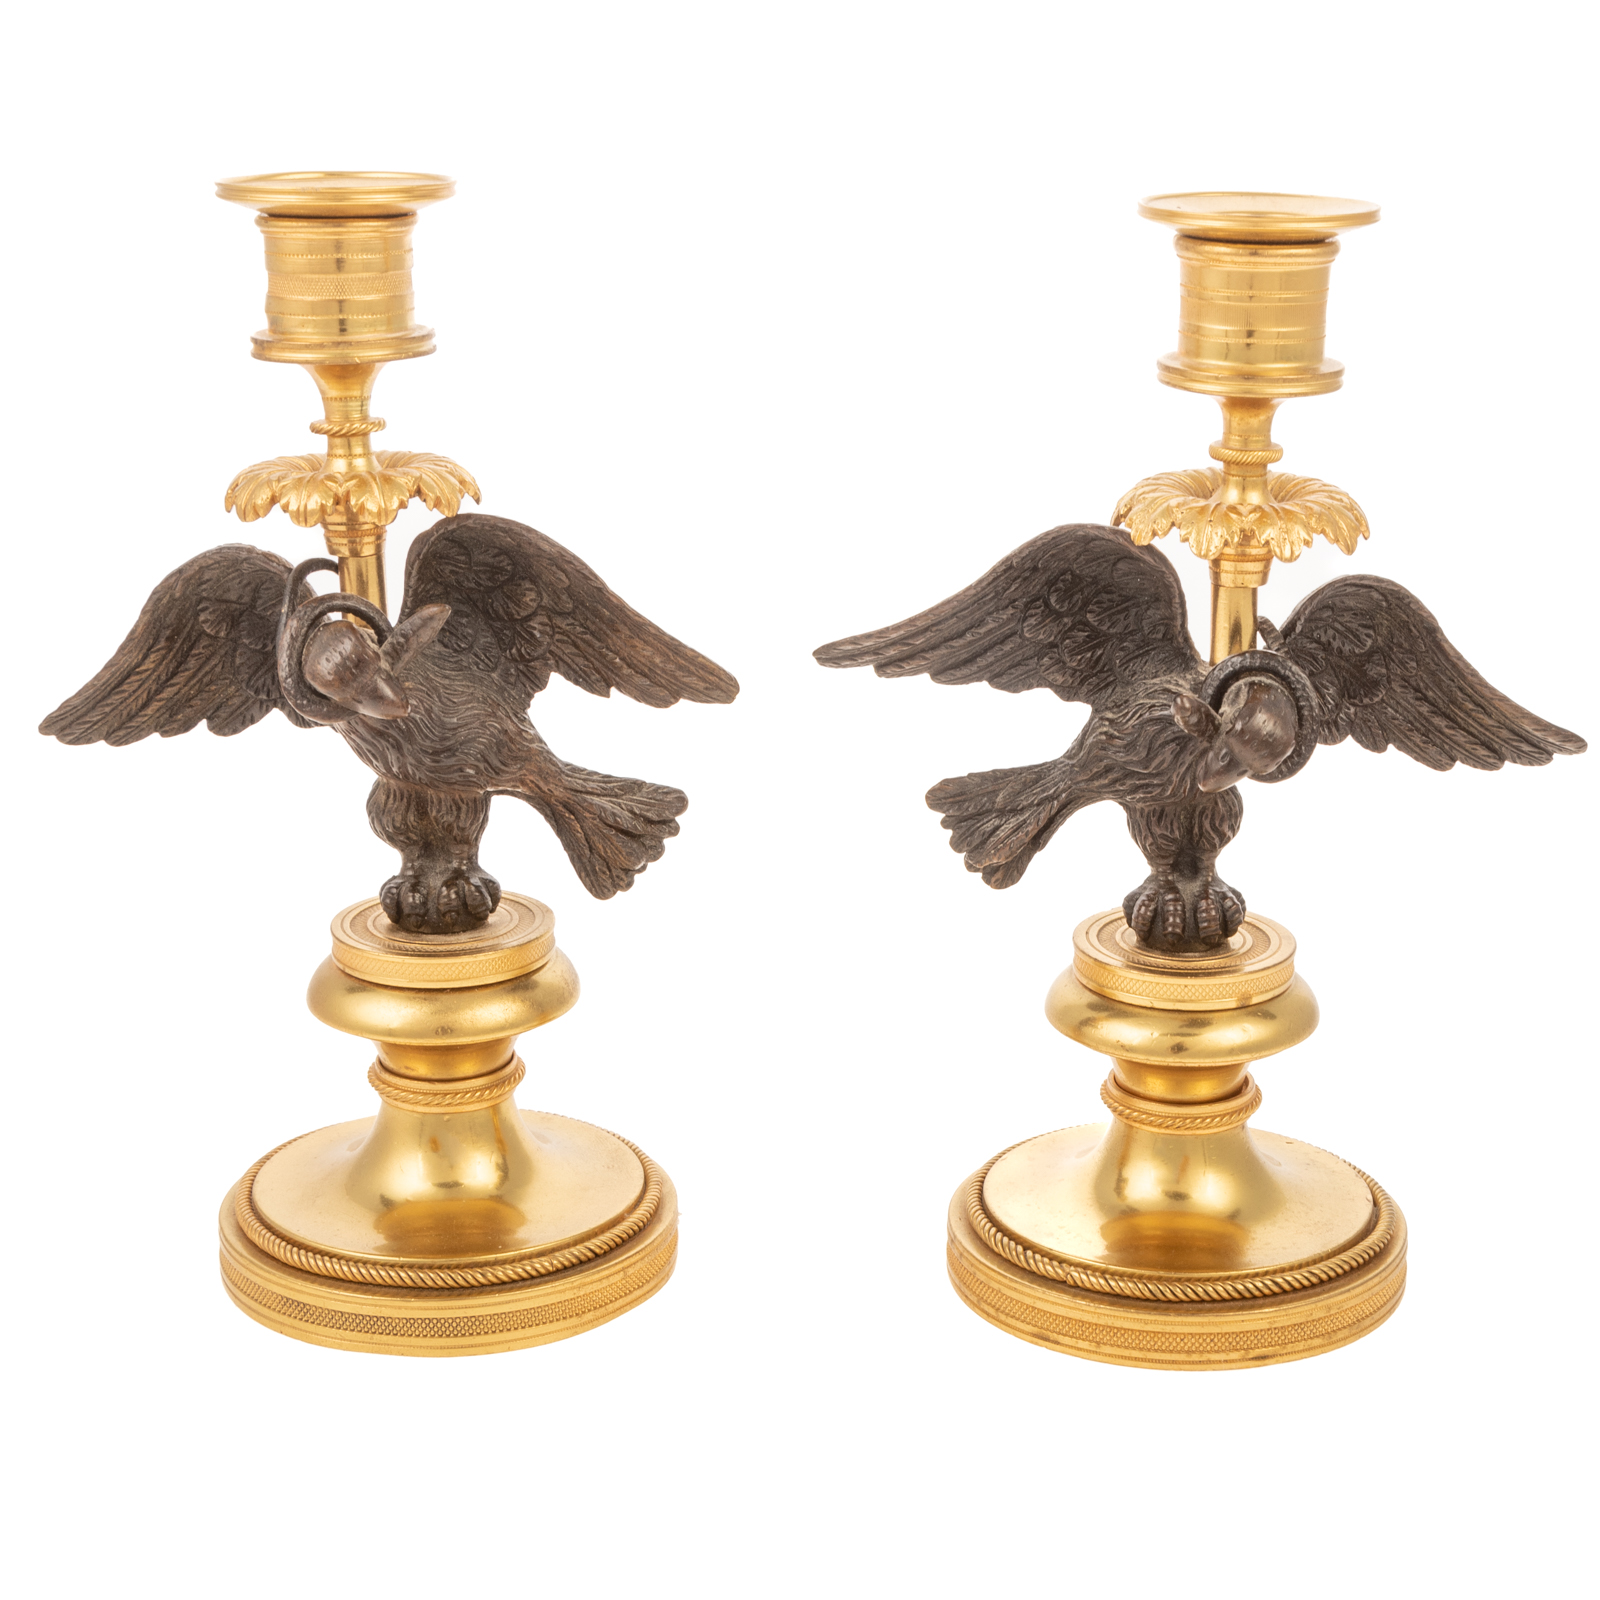 A PAIR OF FRENCH EMPIRE STYLE FIGURAL 2e9a34